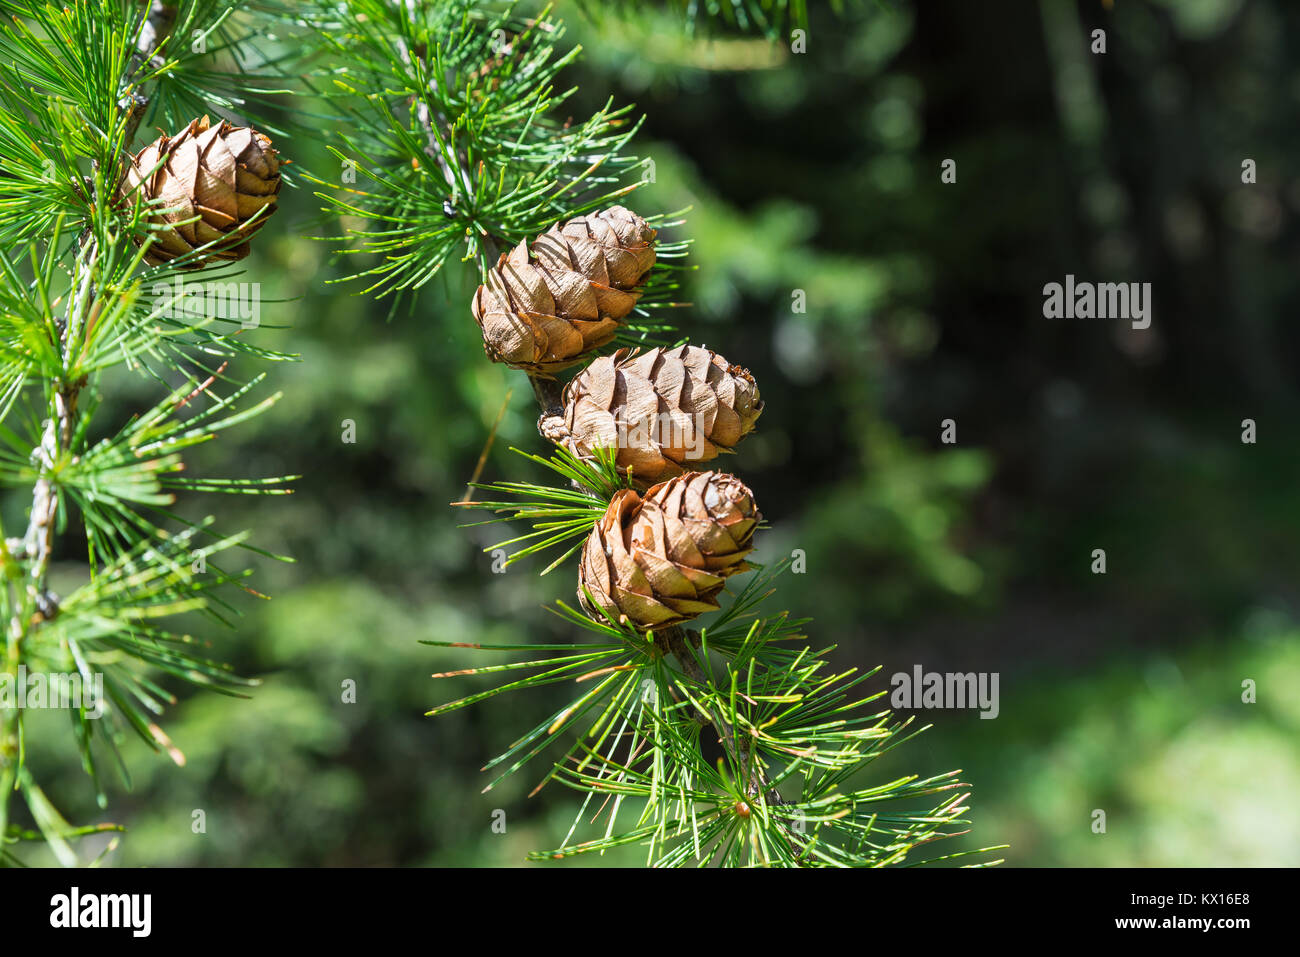 Sprig of European Larch, Larix decidua with mature pine cones on blurred background and copy space on the right. Photo taken in the summer on the Alps Stock Photo